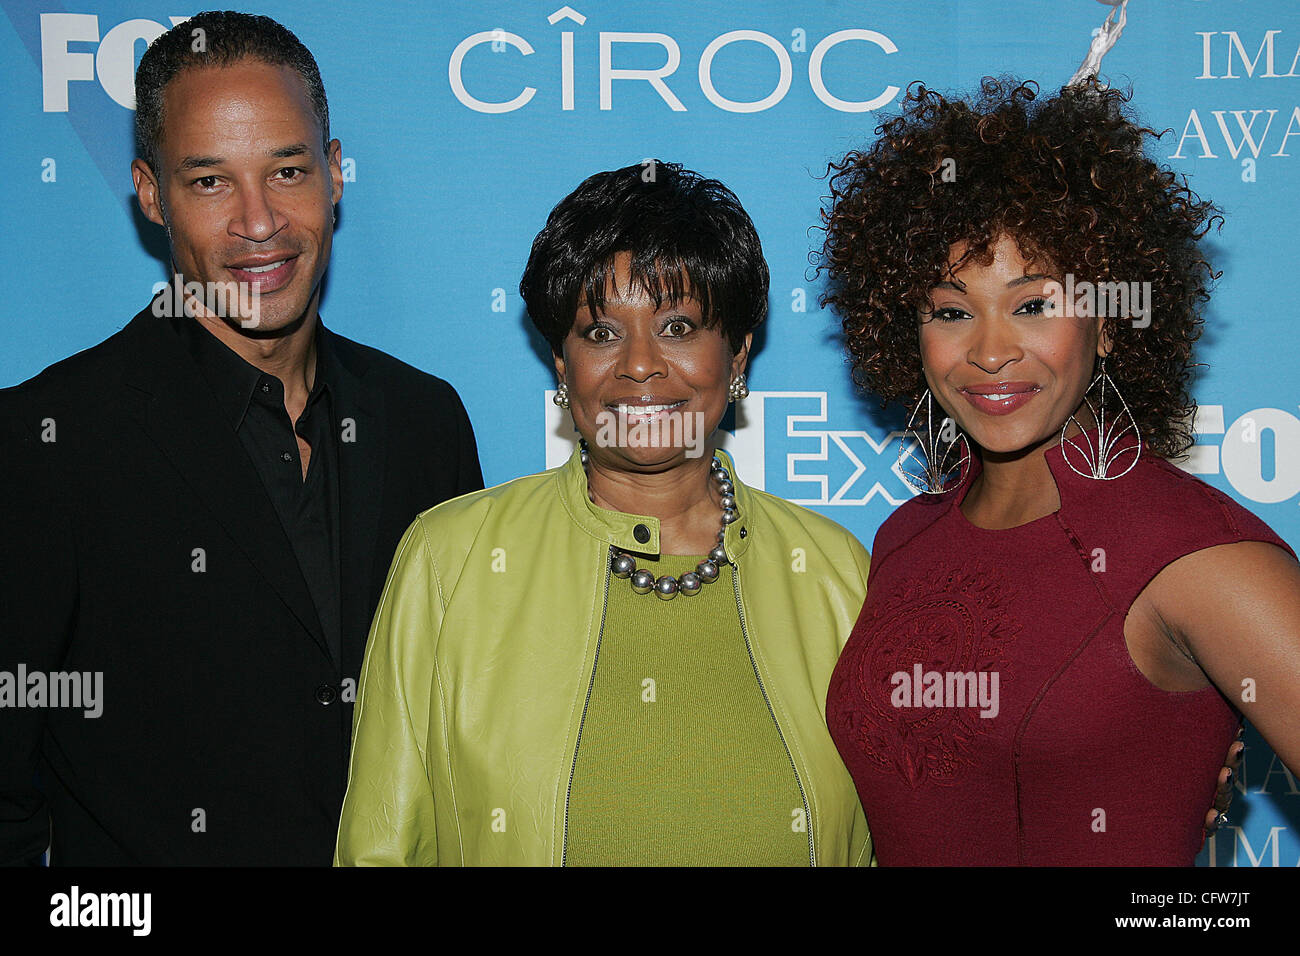 Feb 10, 2007; Beverly Hills, CA, USA; JON KELLEY, CLAYOLA BROWN and TANIKA RAY during arrivals at the 38th NAACP Image Awards Nominee Luncheon held at the Beverly Hills Hotel in Beverly Hills, CA. Mandatory Credit: Photo by Jerome Ware/ZUMA Press. (©) Copyright 2007 by Jerome Ware Stock Photo